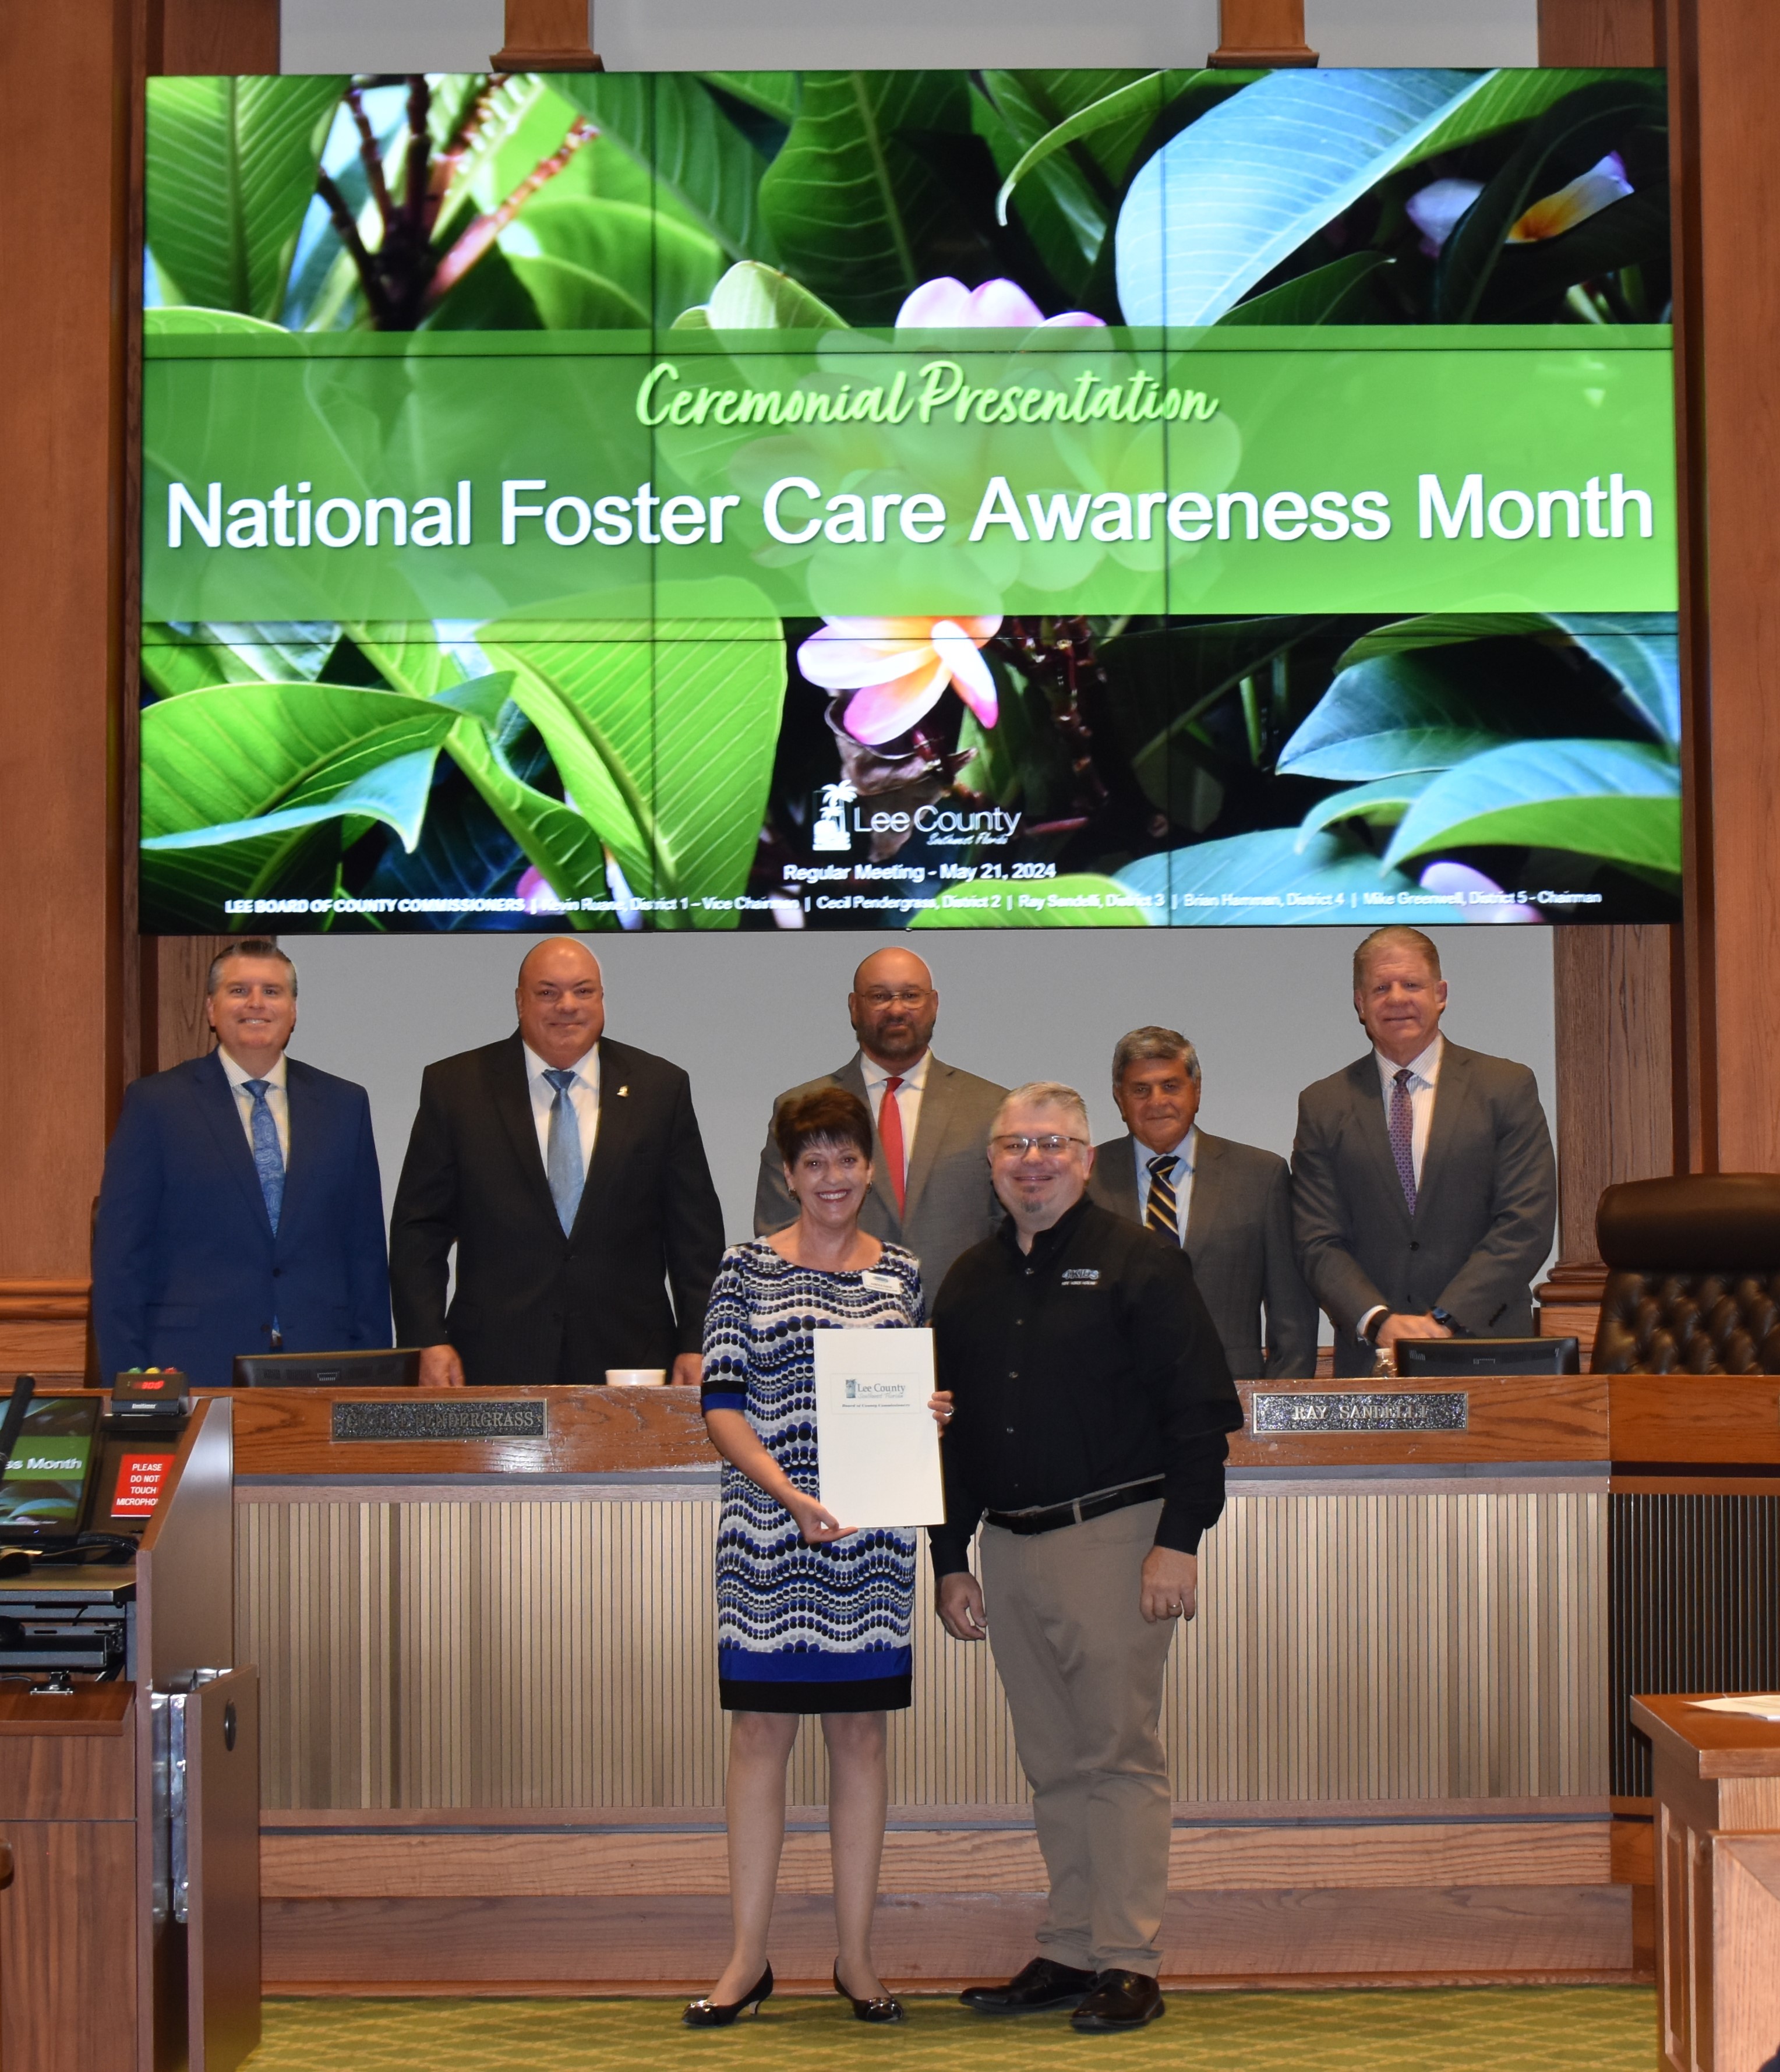 05-21-24 National Foster Care Awareness Month